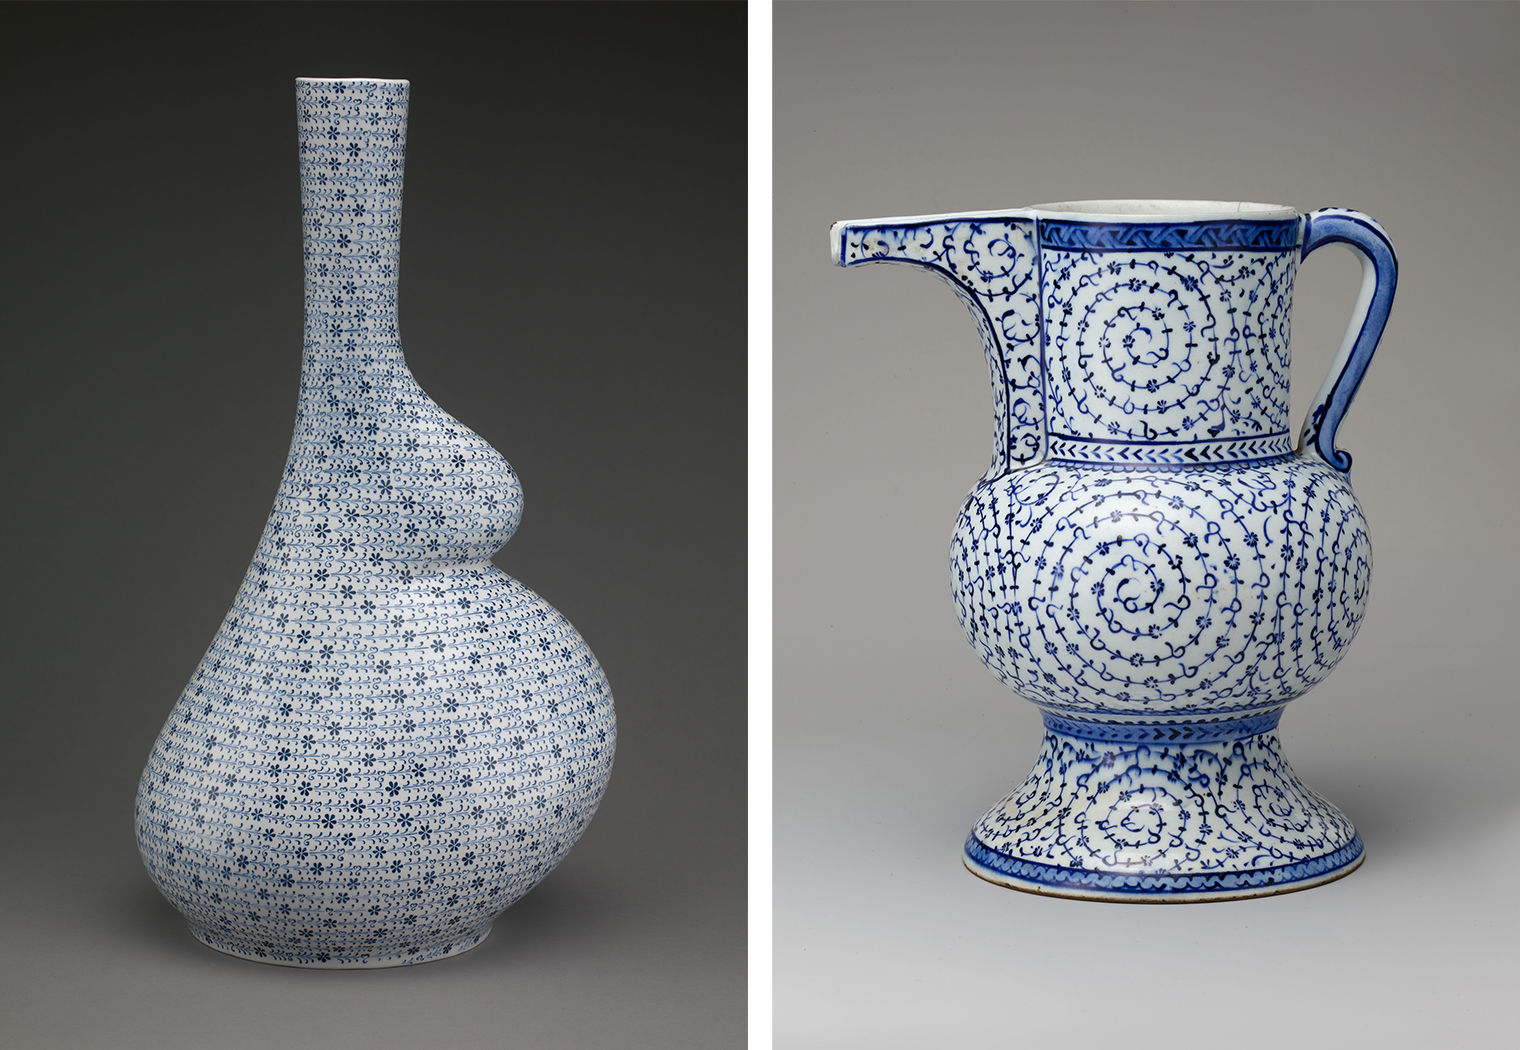 a side by side image of two Iznik ceramic vessels, a contemporary blue and white ceramic vessel in the shape of a pregnant woman on the left, and a blue and white ceramic ewer from the 16th century on the right 